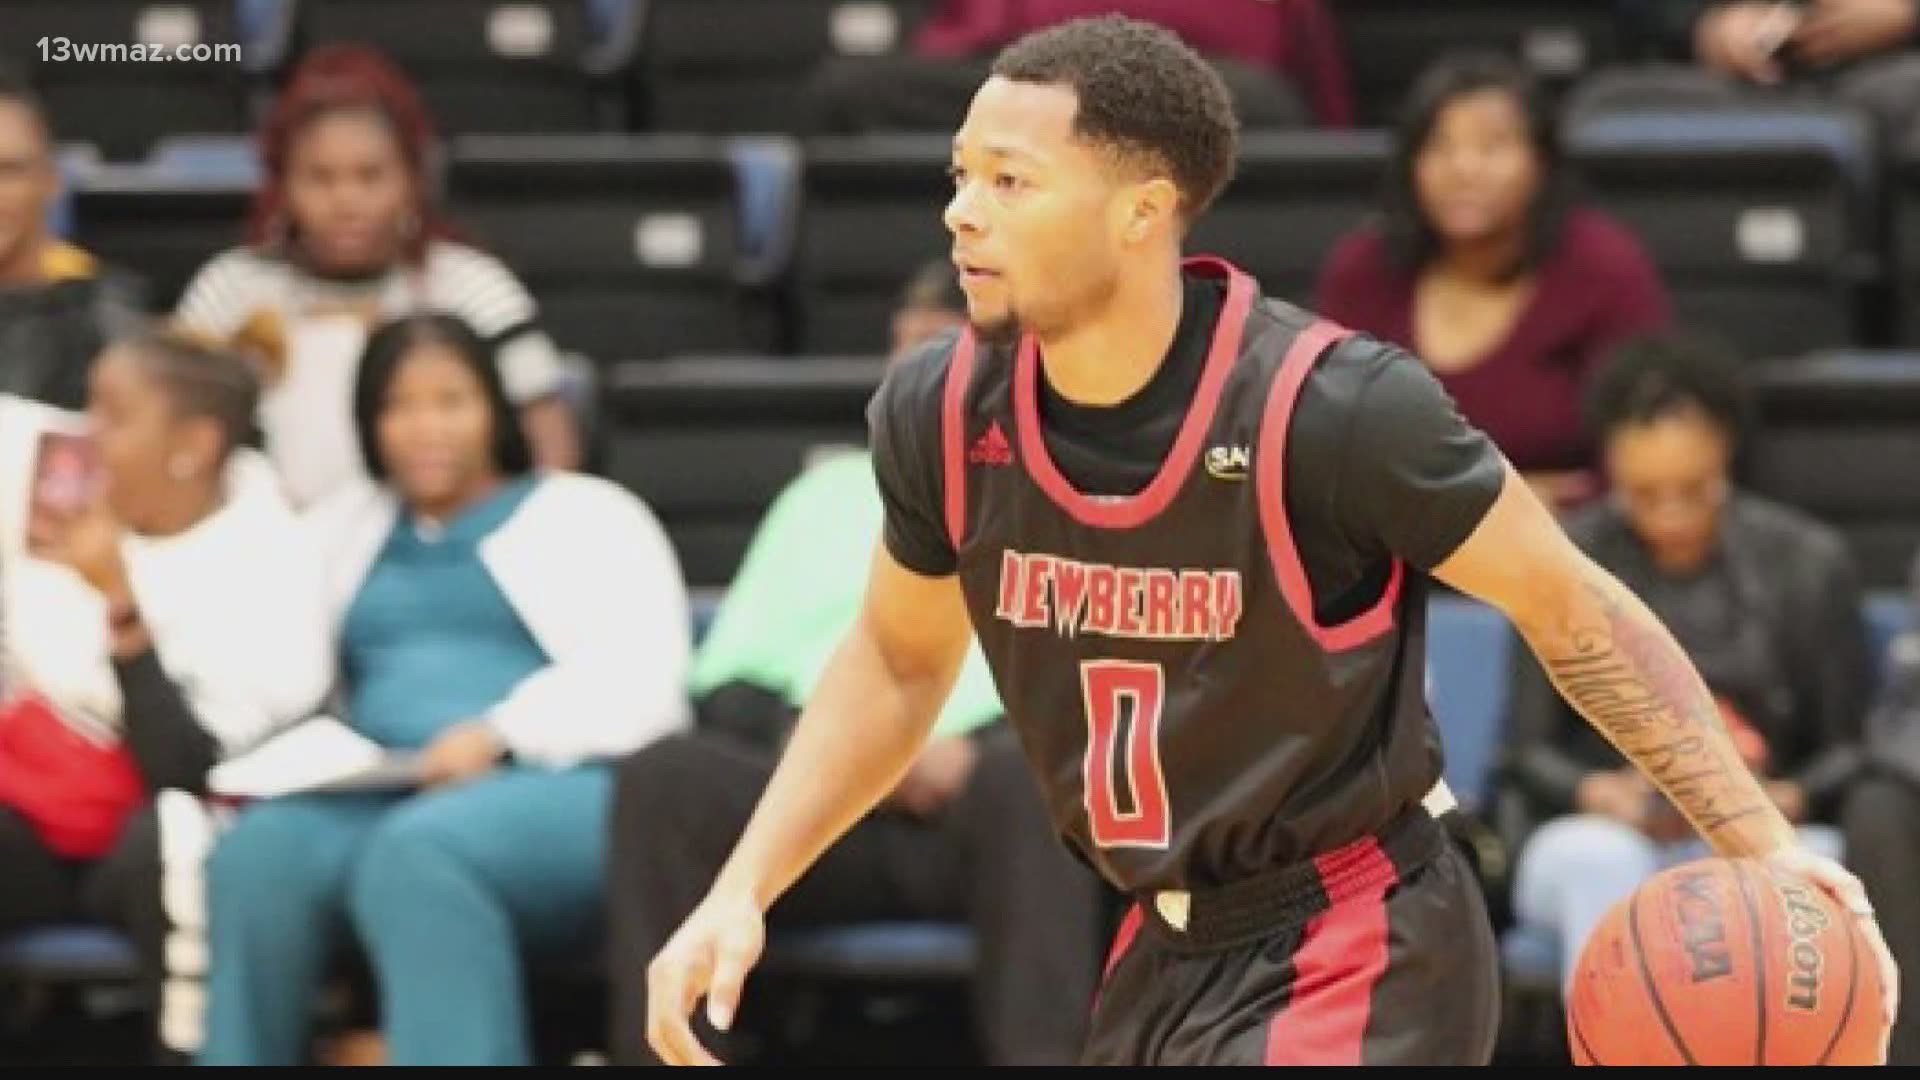 A former Central Georgia basketball standout and state champion is ready to finish his final season of college ball amid this time of uncertainty with COVID-19.